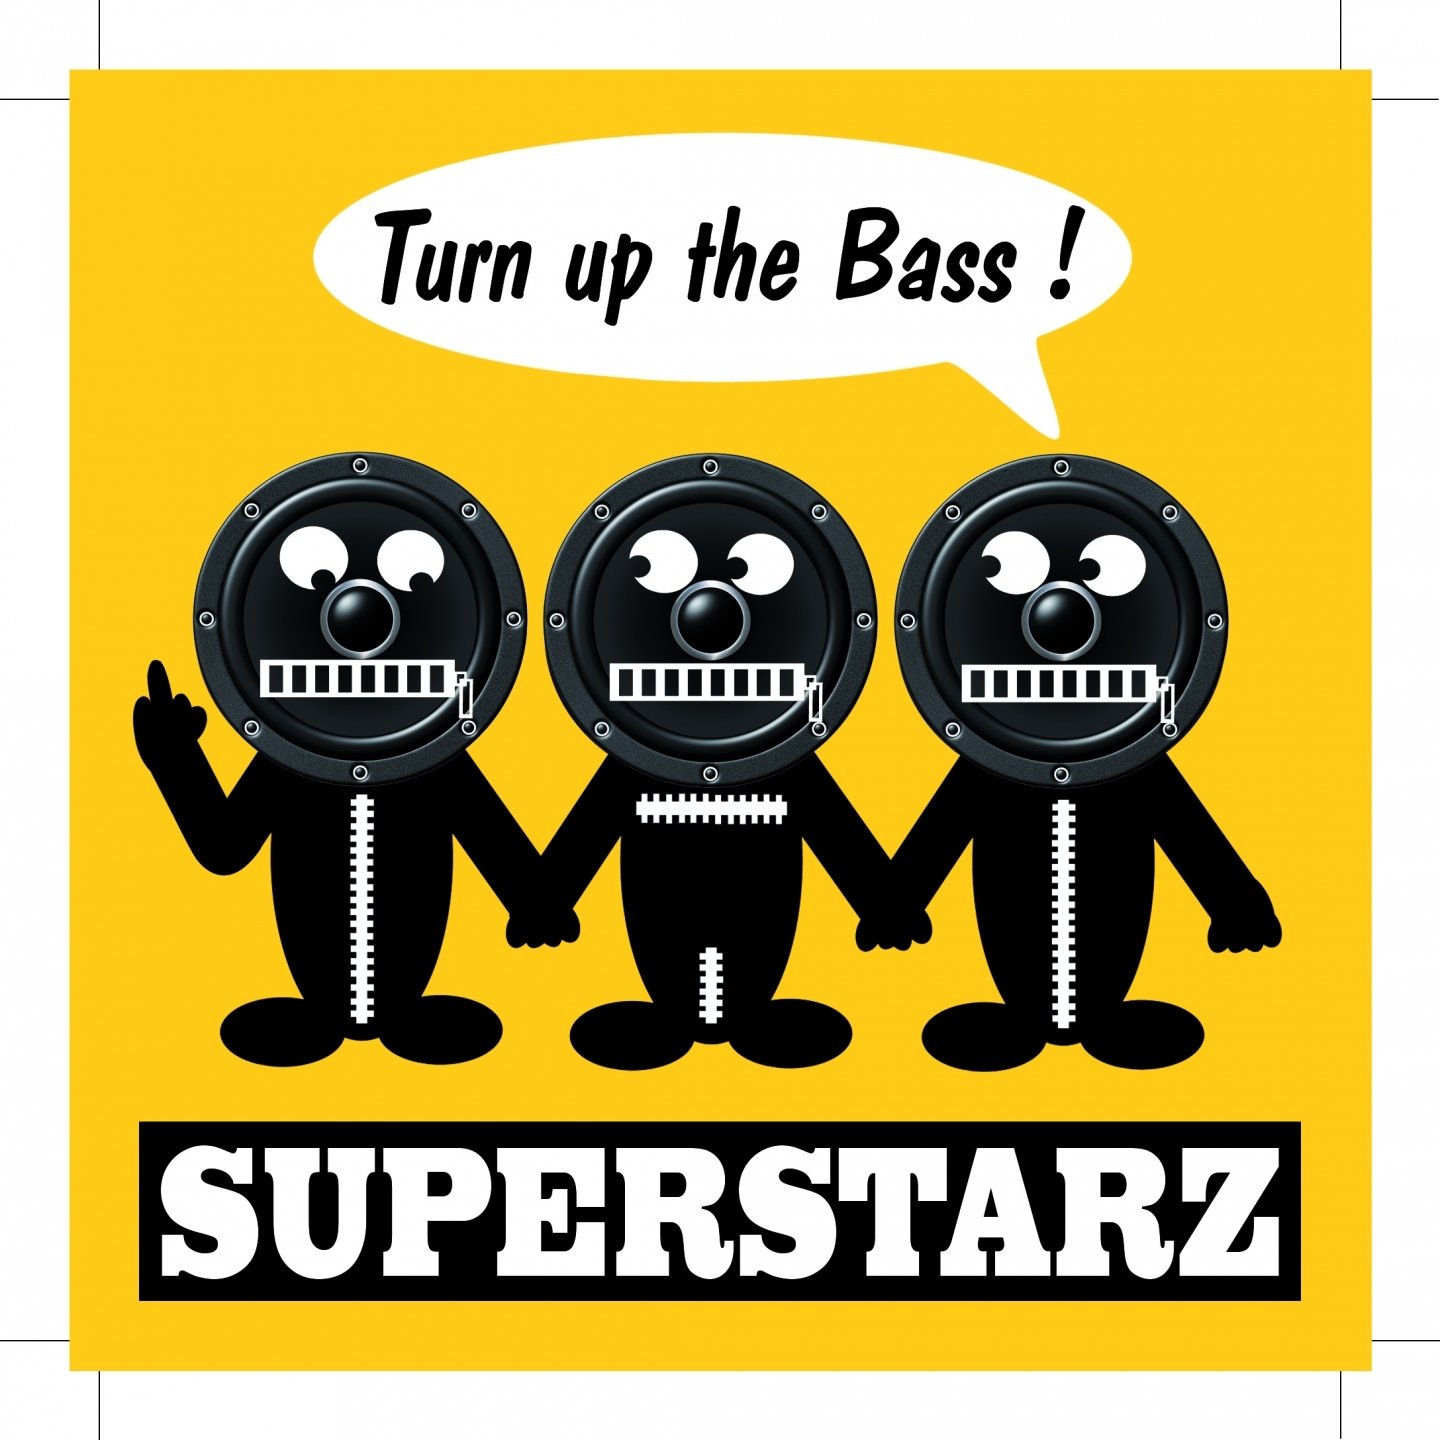 Turn up this. Turn up. Turn up the Music. Turn me up. Turn up the Bass with Ultimate Party tracks.